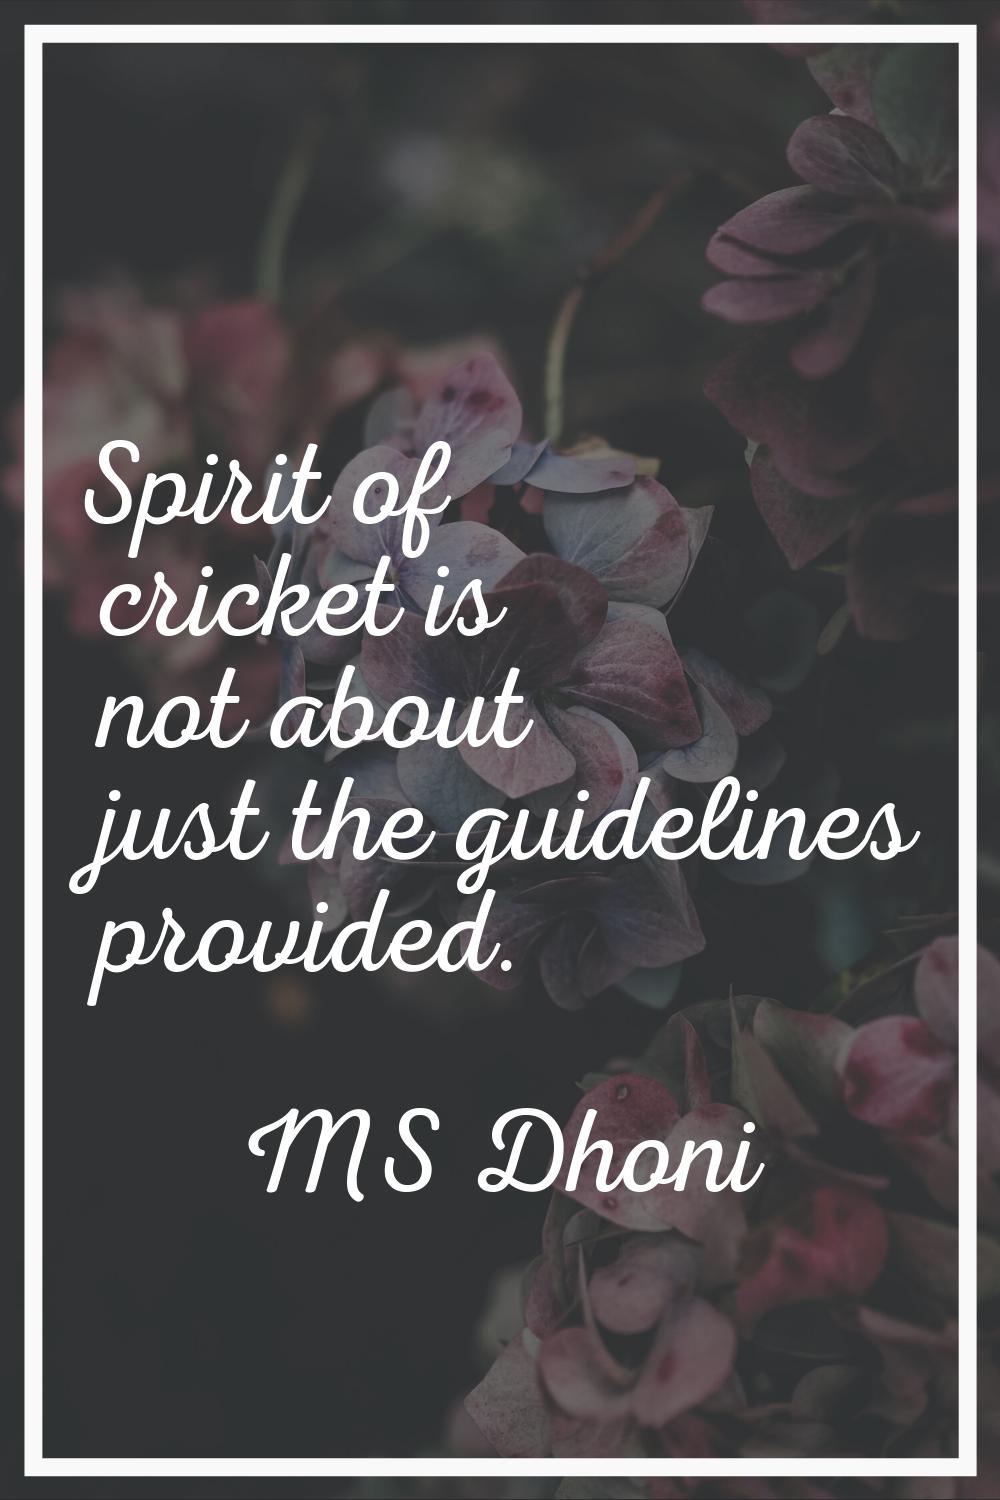 Spirit of cricket is not about just the guidelines provided.